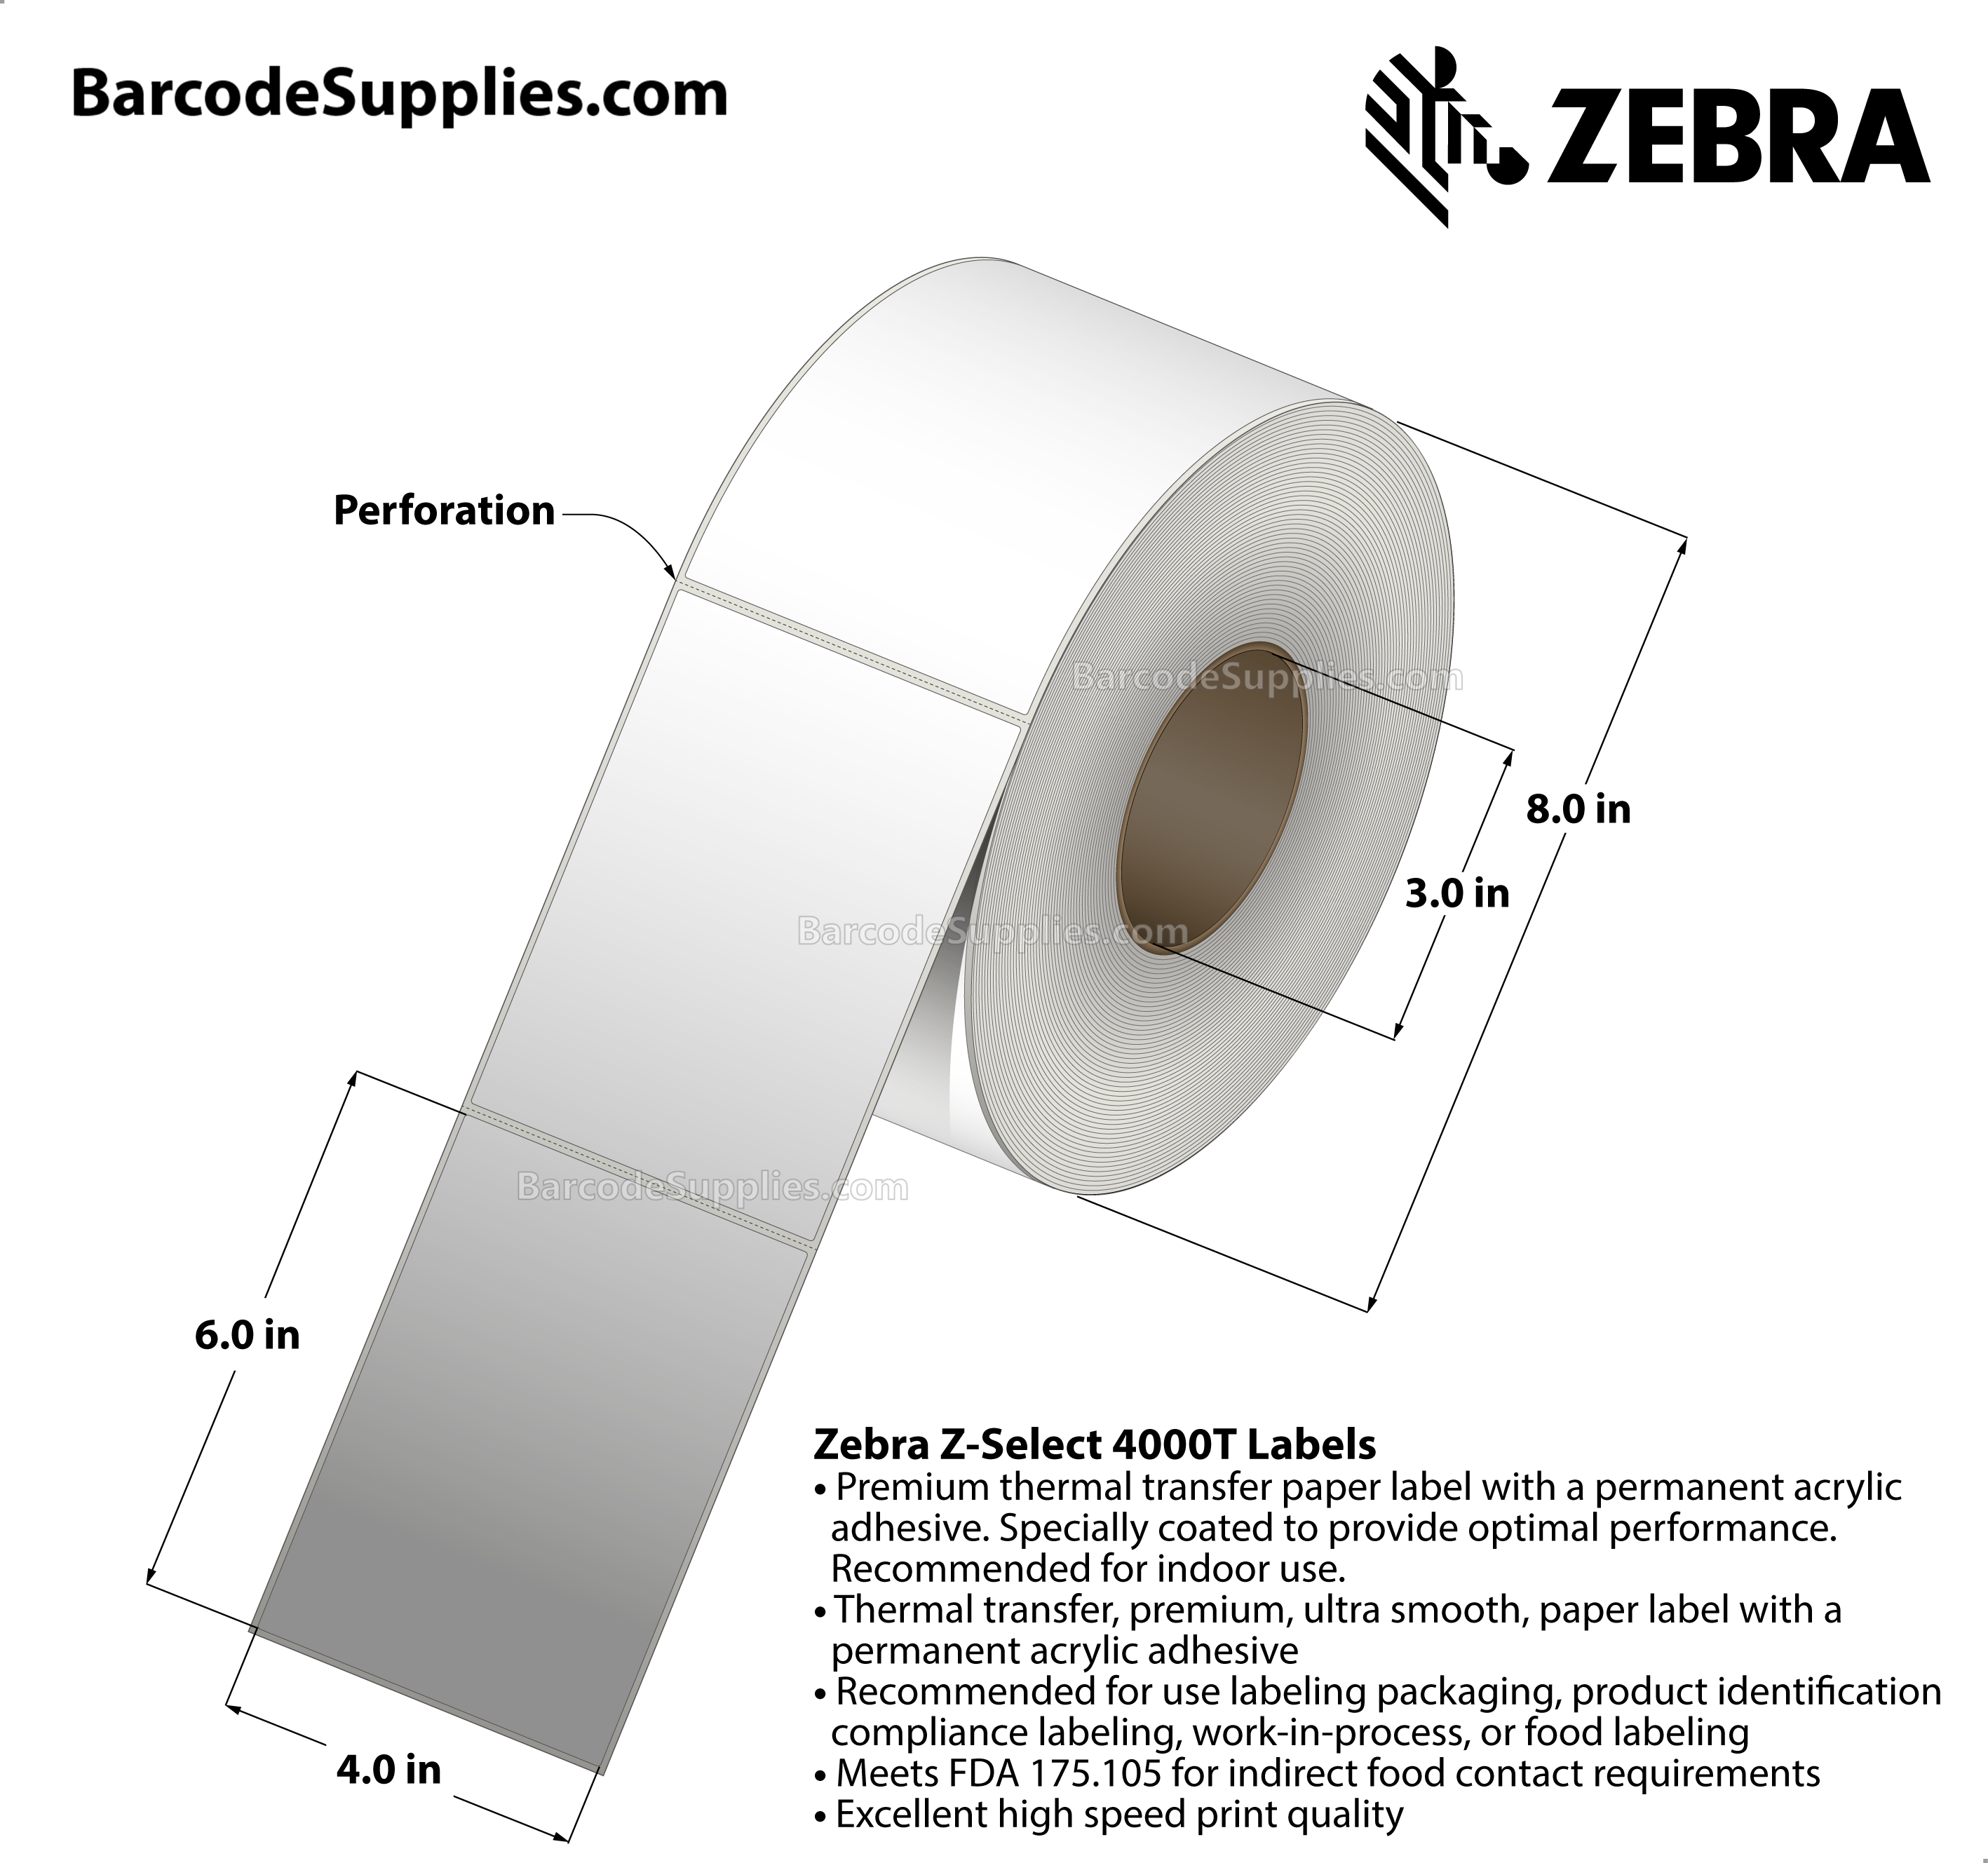 4 x 6 Thermal Transfer White Z-Select 4000T Labels With Permanent Adhesive - Perforated - 950 Labels Per Roll - Carton Of 4 Rolls - 3800 Labels Total - MPN: 72294